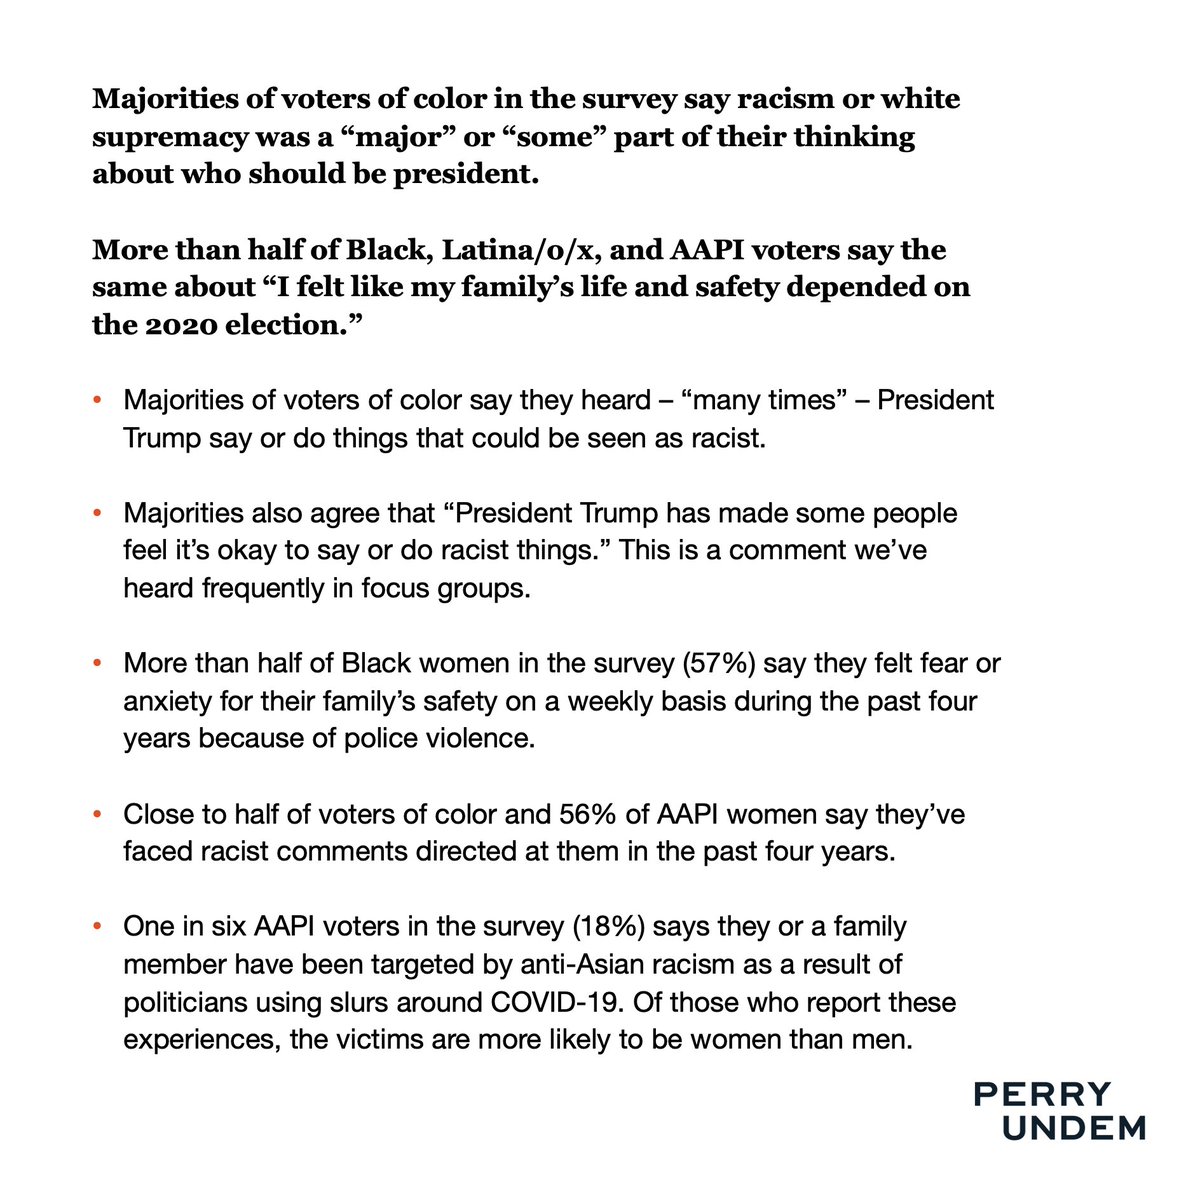 17. Among many voters of color, themes of racism, violence, safety and security were voting issues. (We also looked at predictors by race/ethnicity - in report)